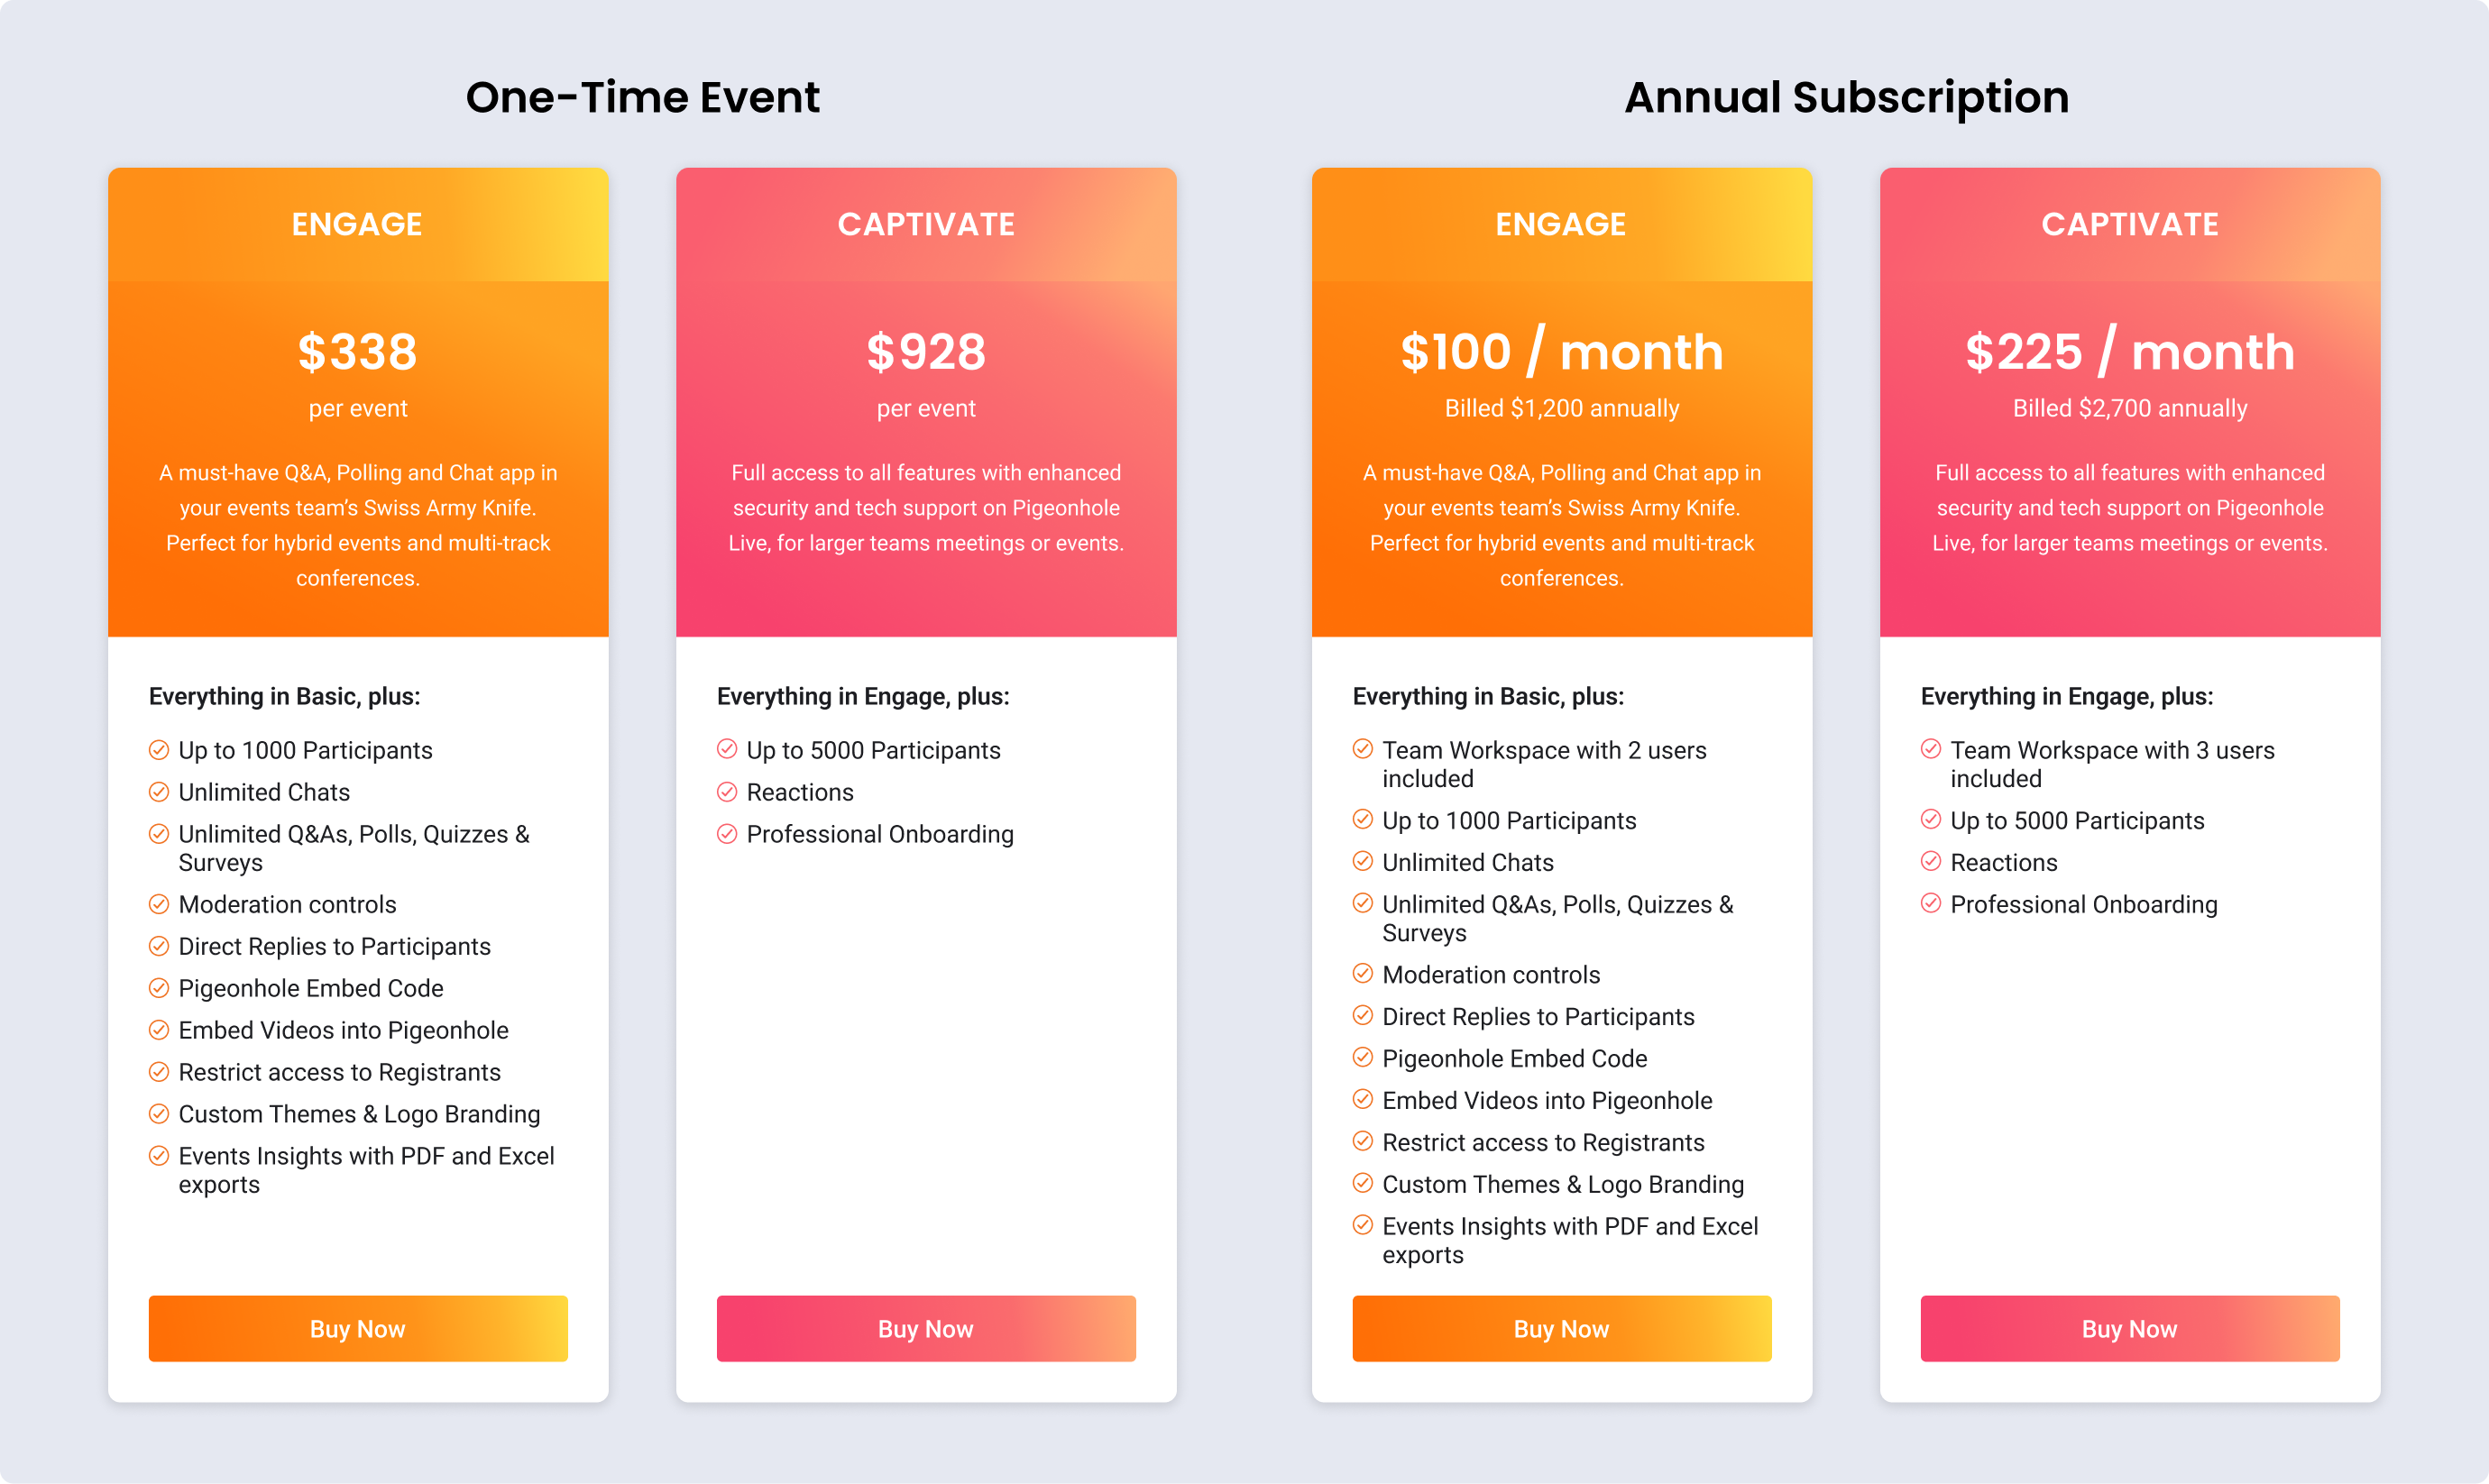 choice between engage and captivate options for one time event or annual subscription